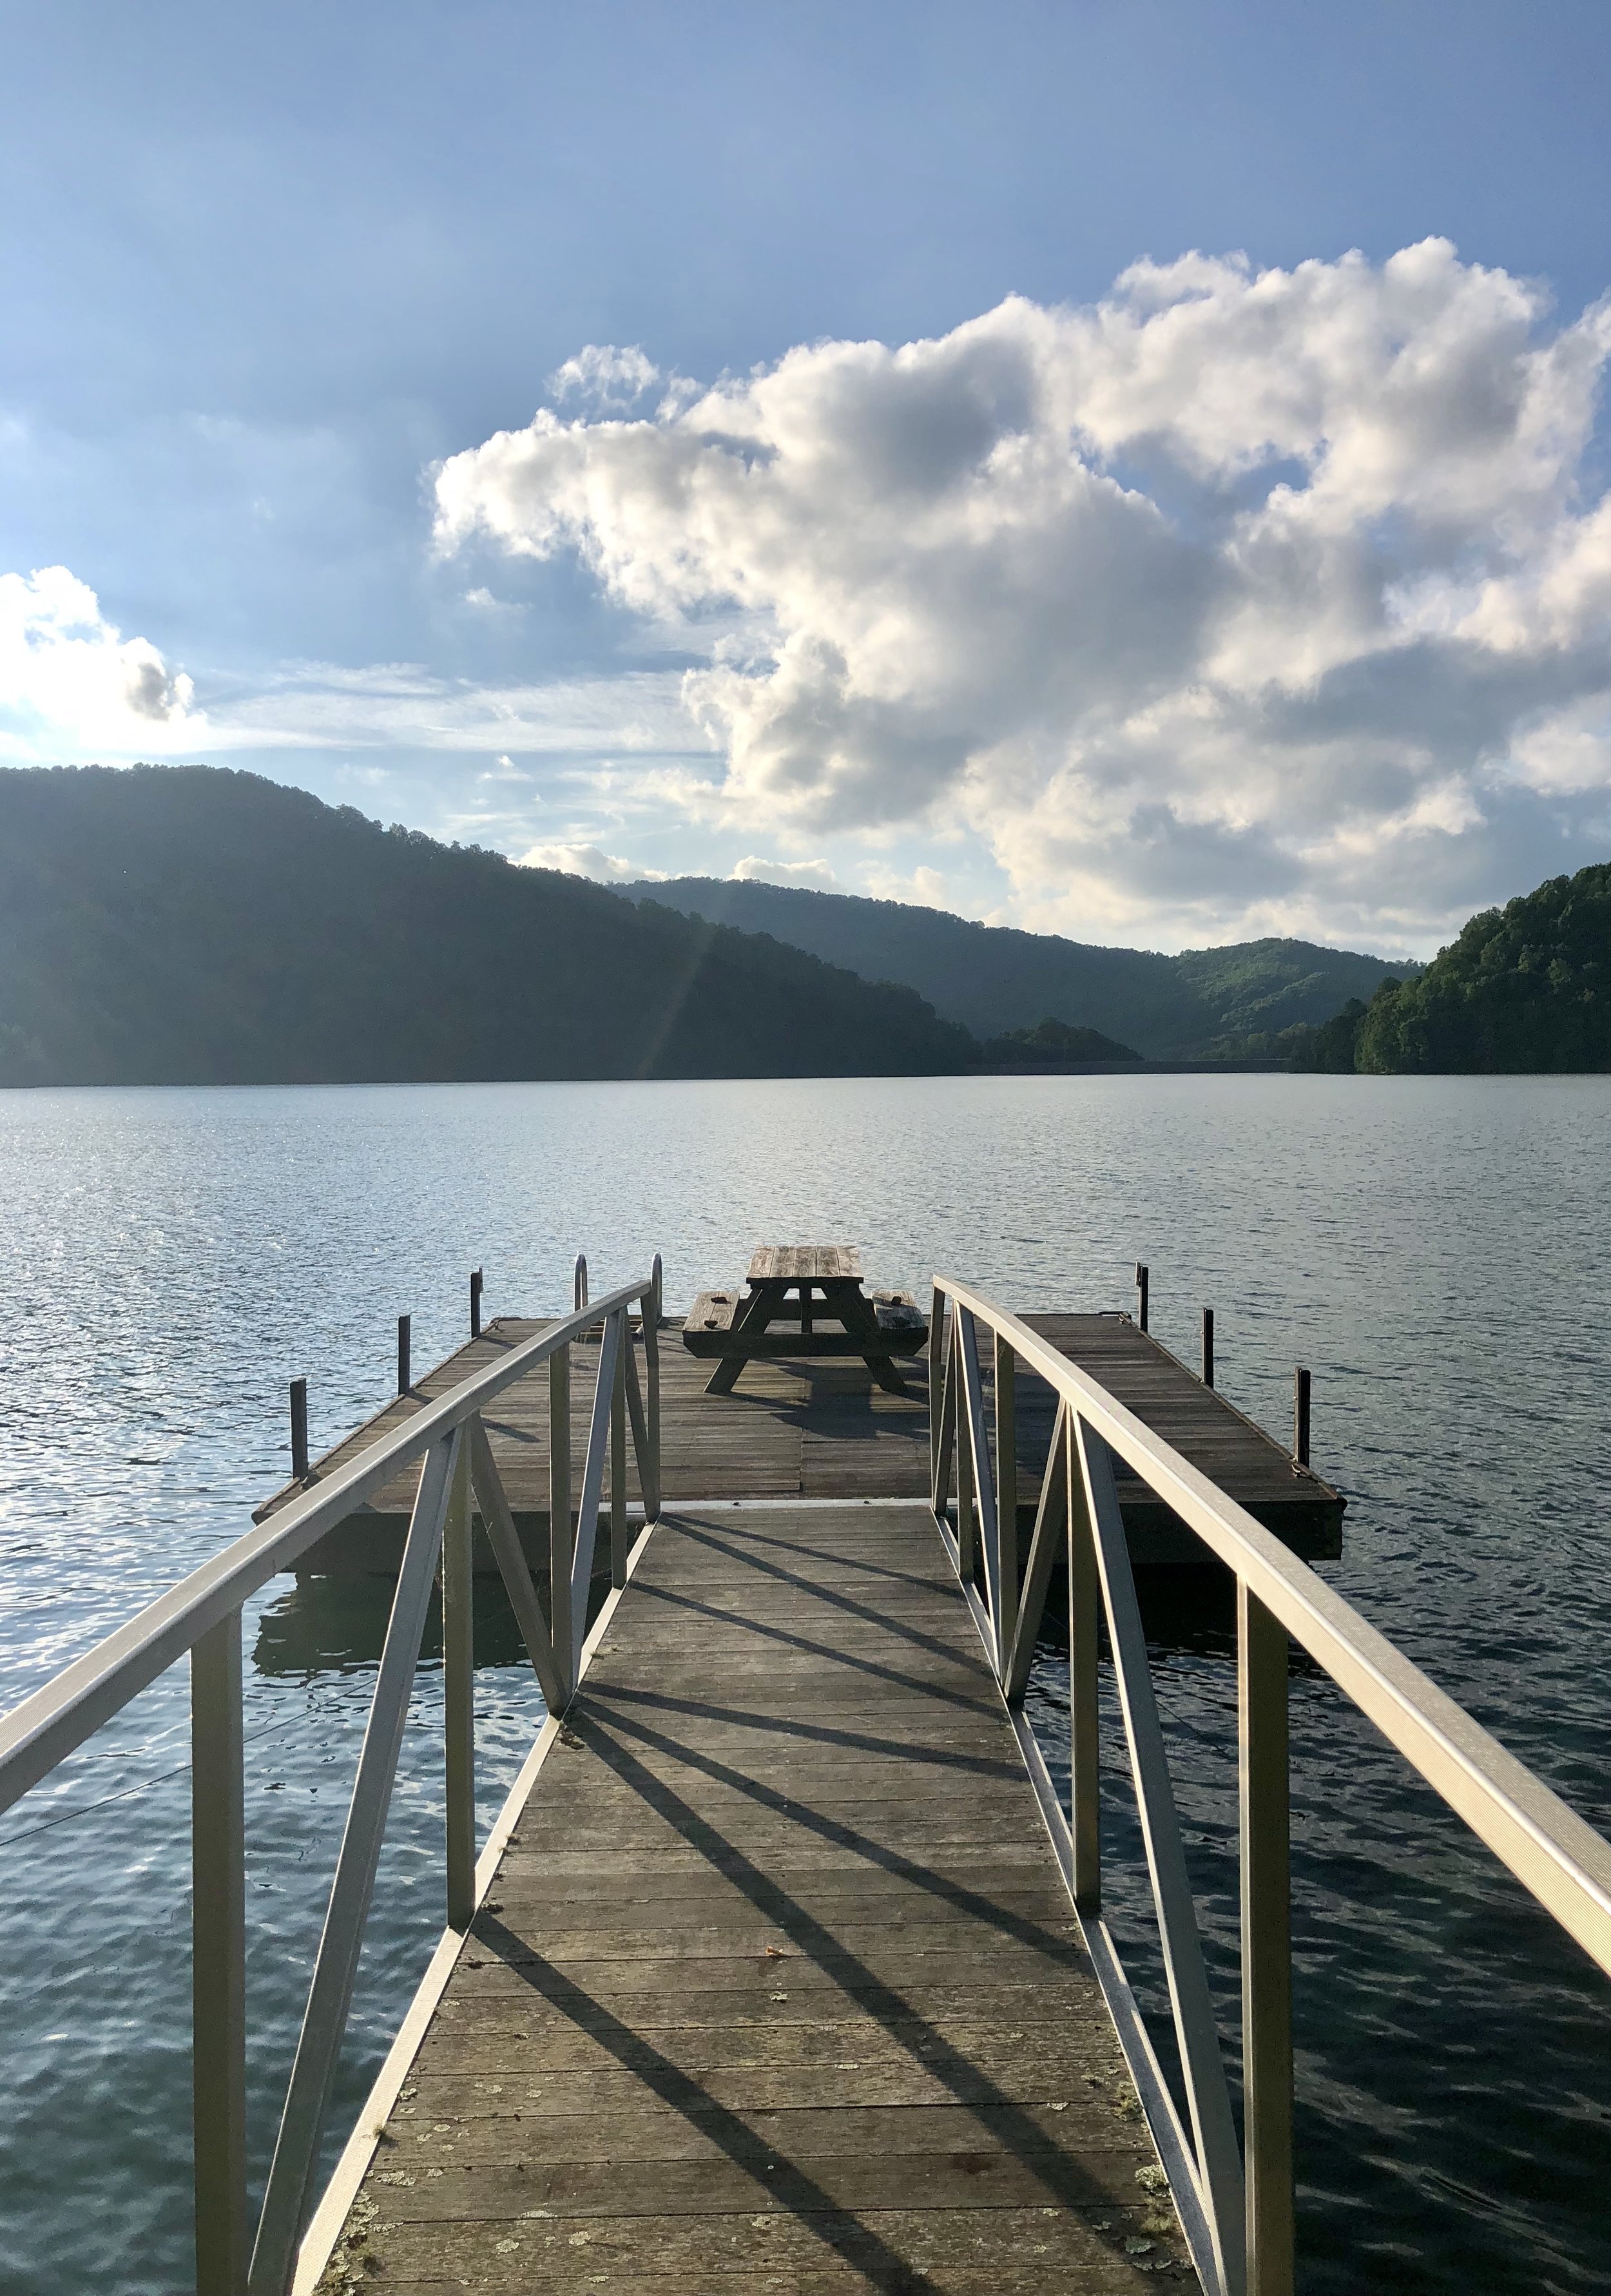 Dock on a lake in the mountains in North Carolina